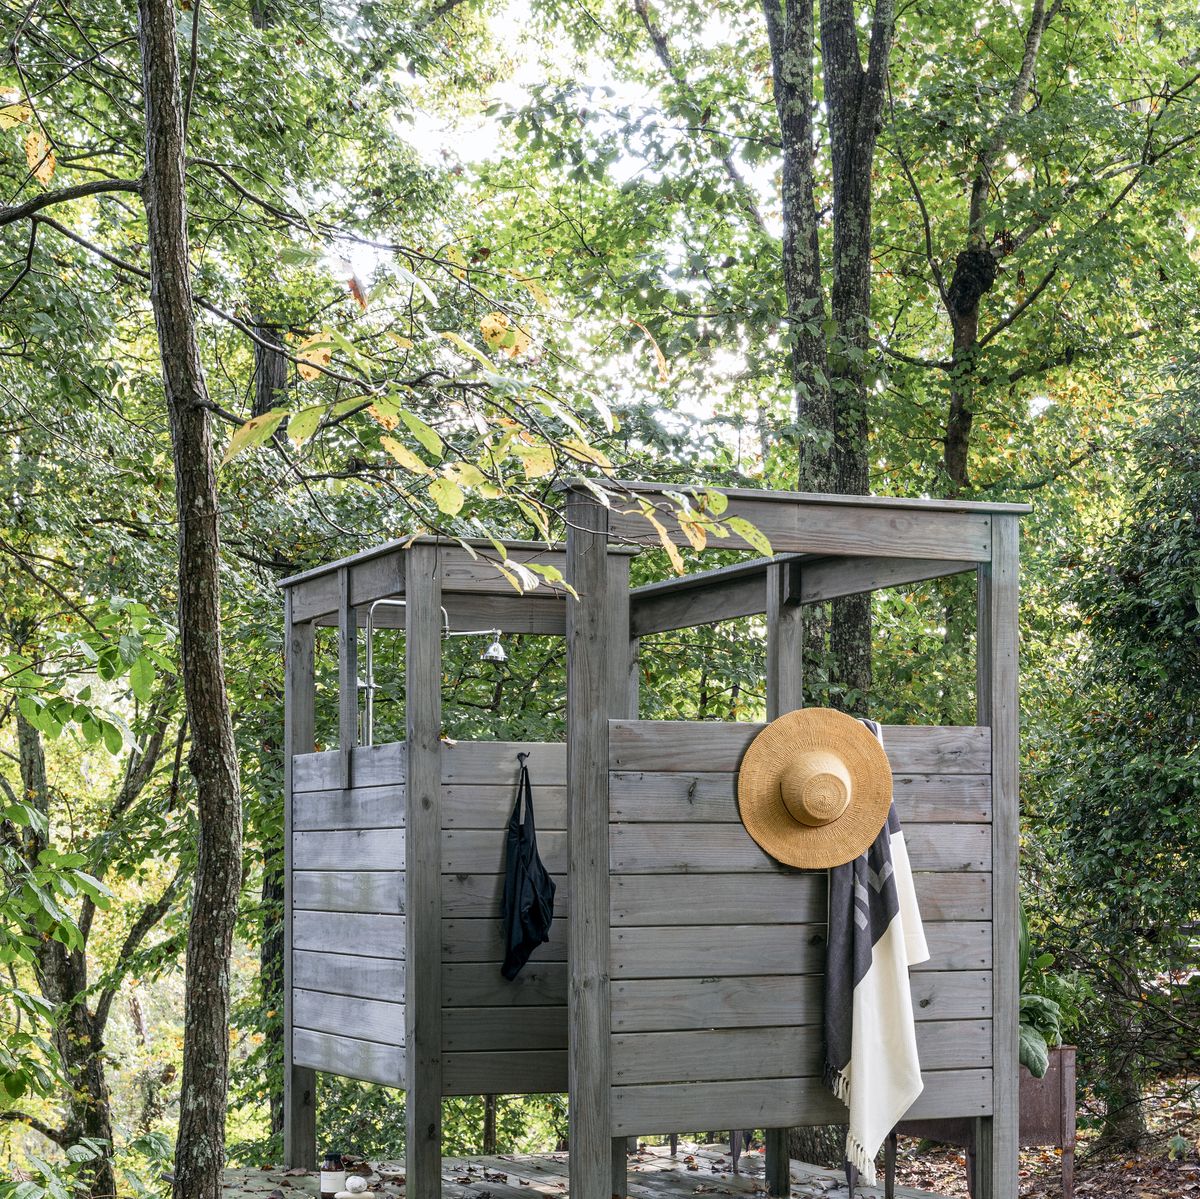 https://hips.hearstapps.com/hmg-prod/images/tennessee-farm-cabin-outdoor-shower-6453ff634c210.jpg?crop=0.920xw:0.657xh;0.0521xw,0.191xh&resize=1200:*